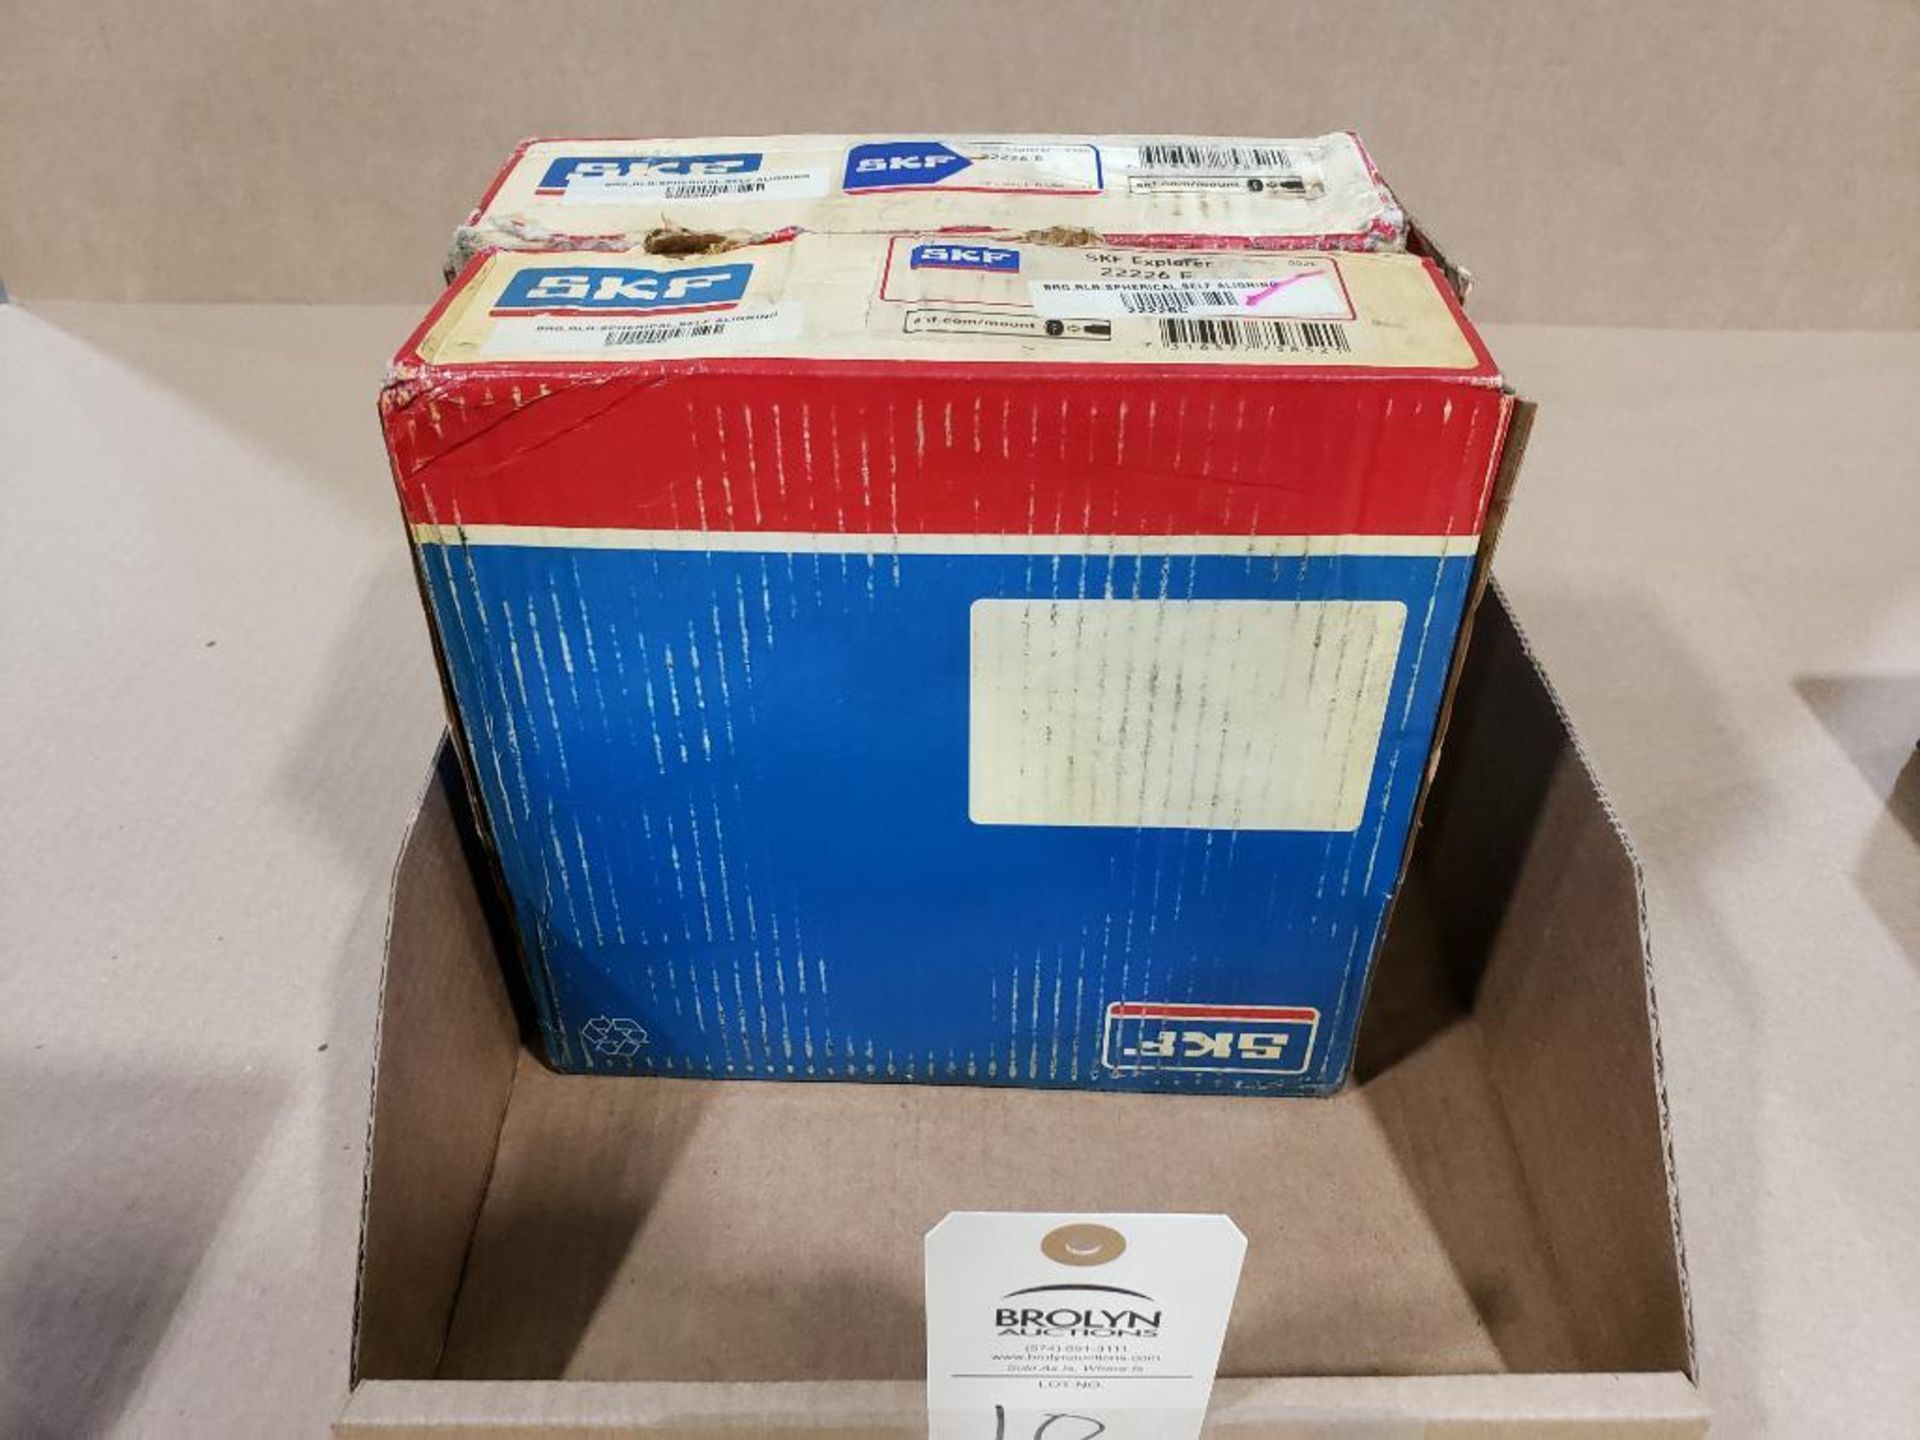 Qty 2 - SKF bearings. Part number 22226E.